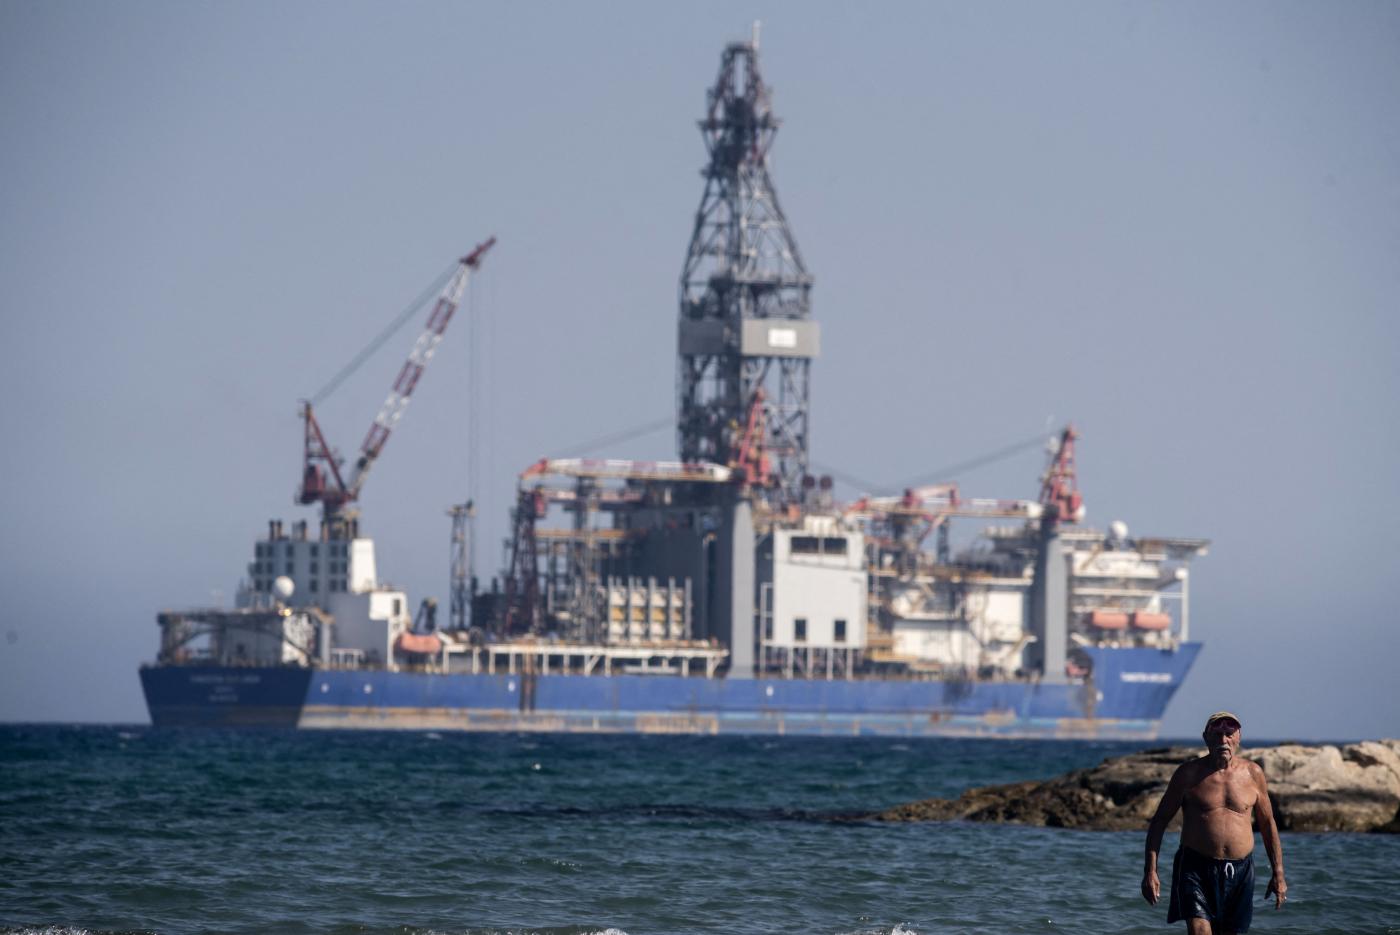 The Tungsten Explorer drilling ship off the coast of the Cypriot town of Oroklini in the gulf of Larnaca, on 21 July 2020 (AFP)